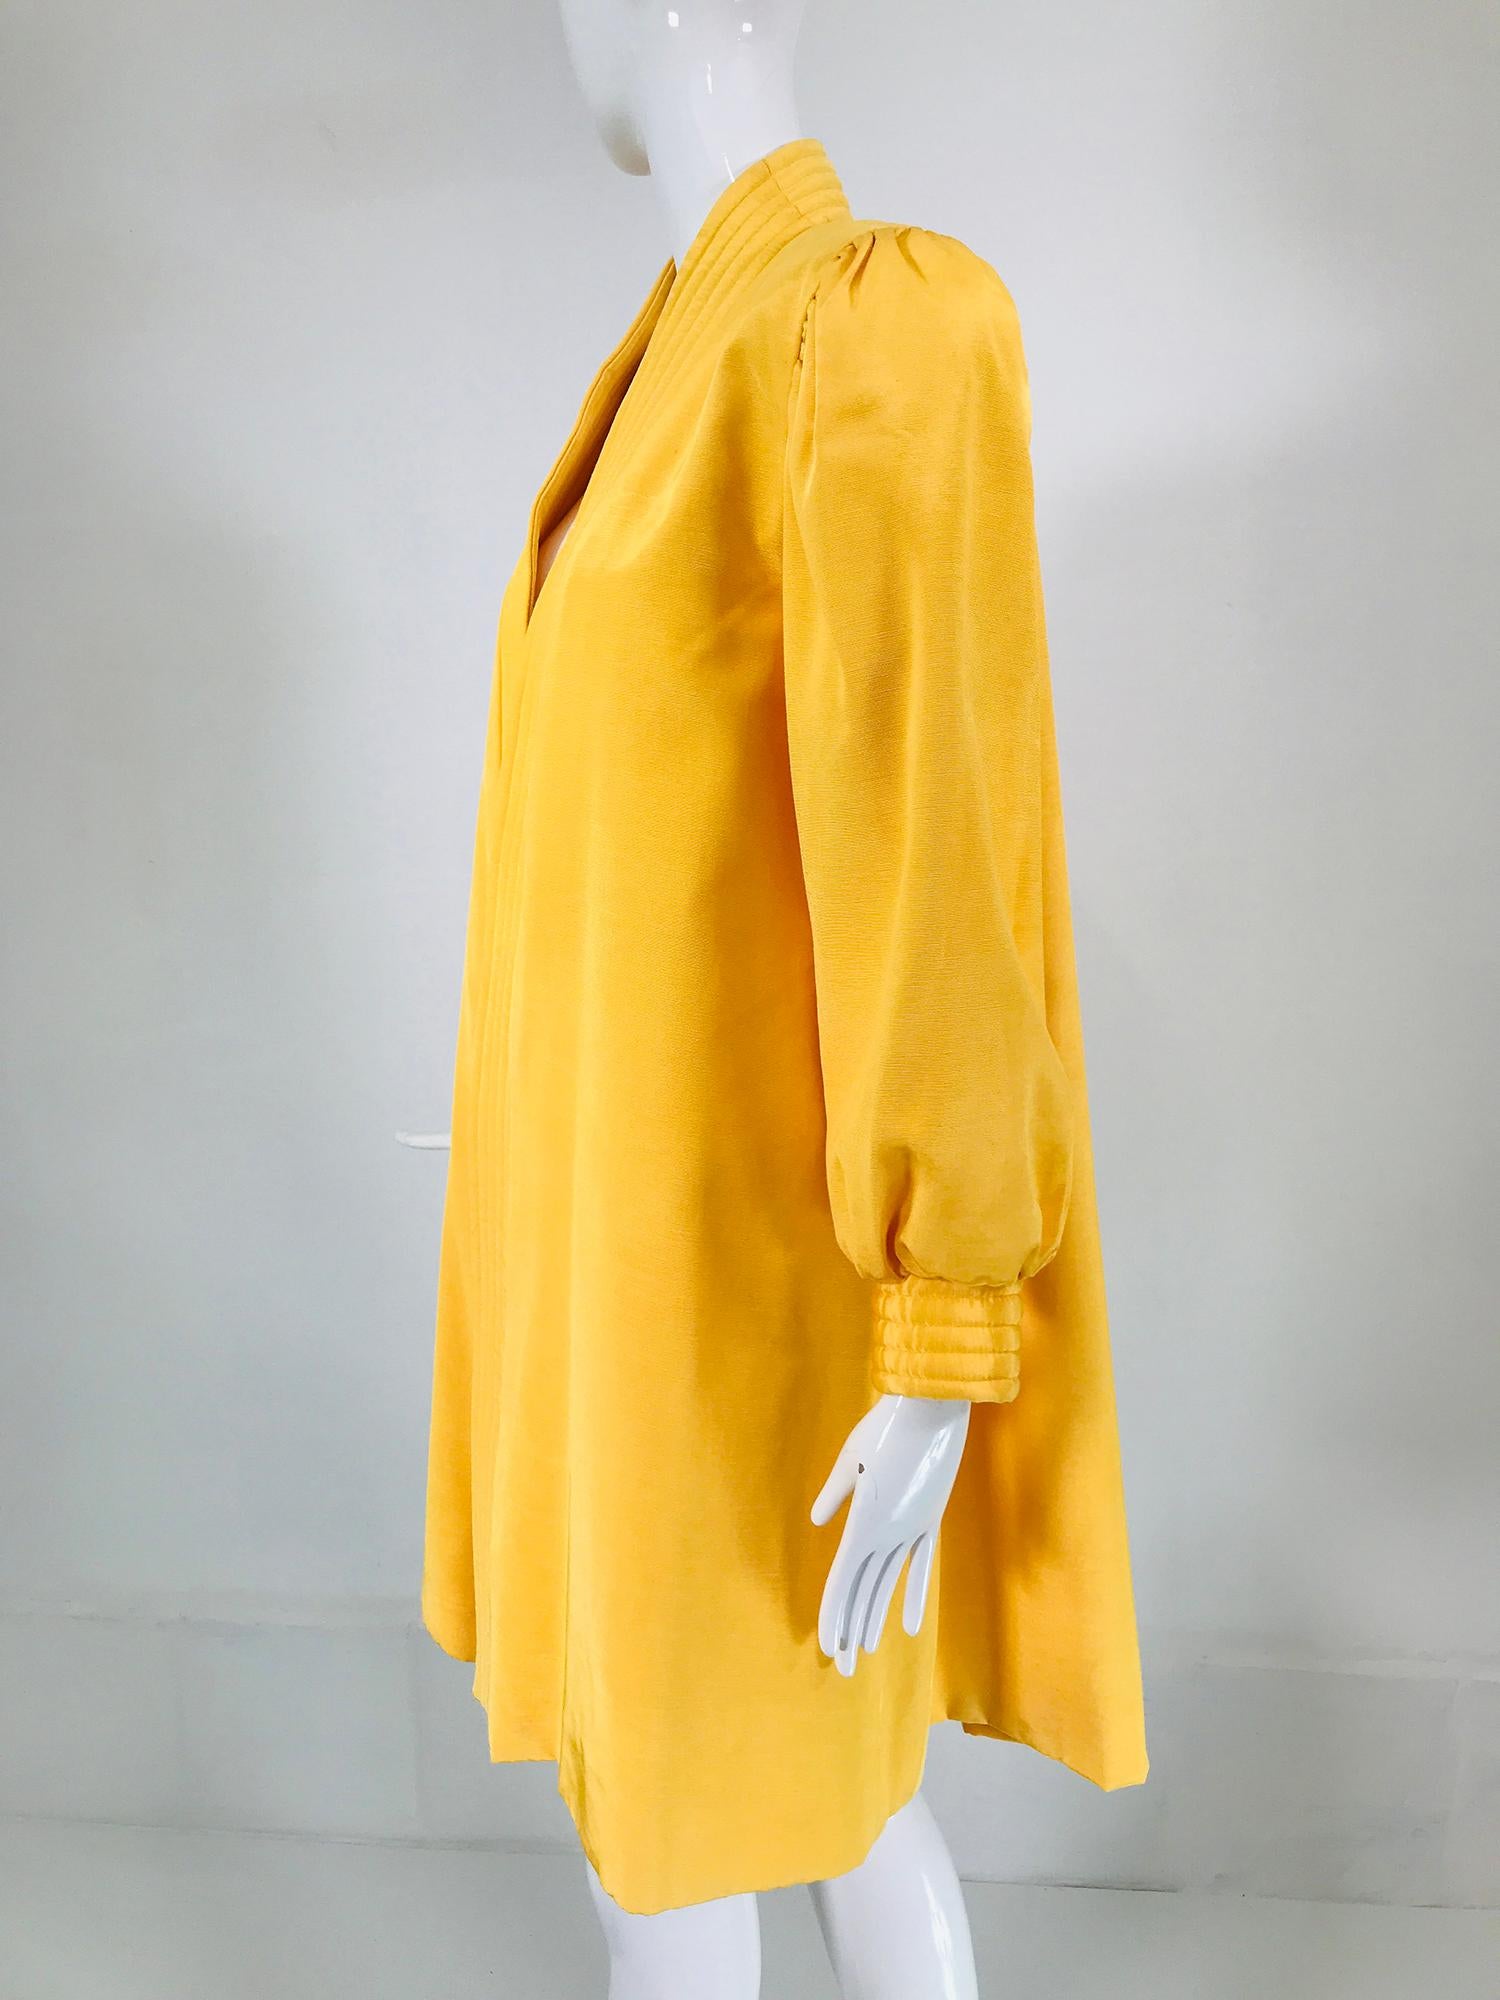 Victor Costa Mustard Yellow Faille Coat Quilted Facings & Cuffs 1980s In Good Condition For Sale In West Palm Beach, FL